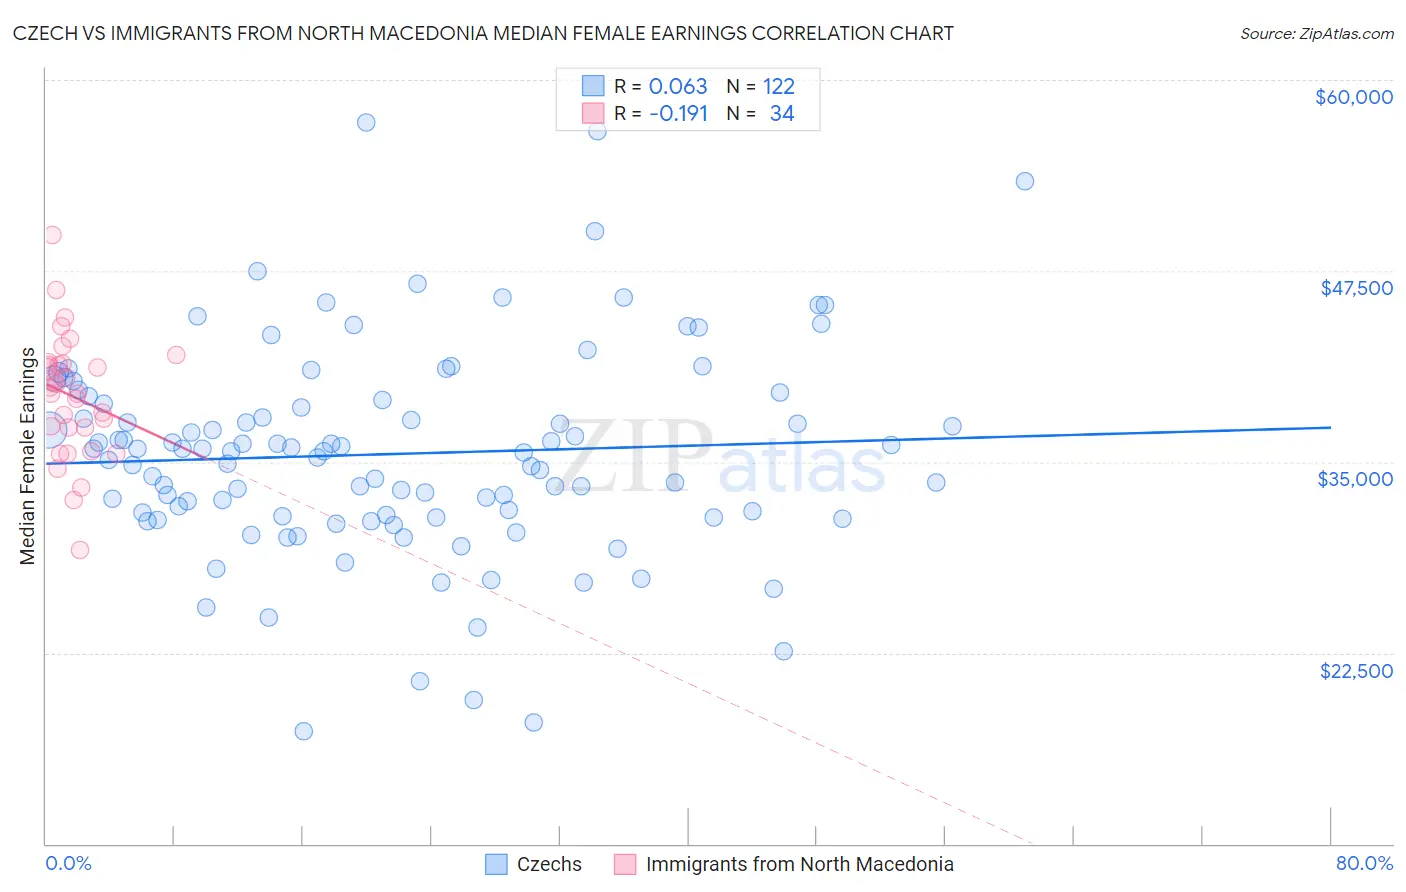 Czech vs Immigrants from North Macedonia Median Female Earnings